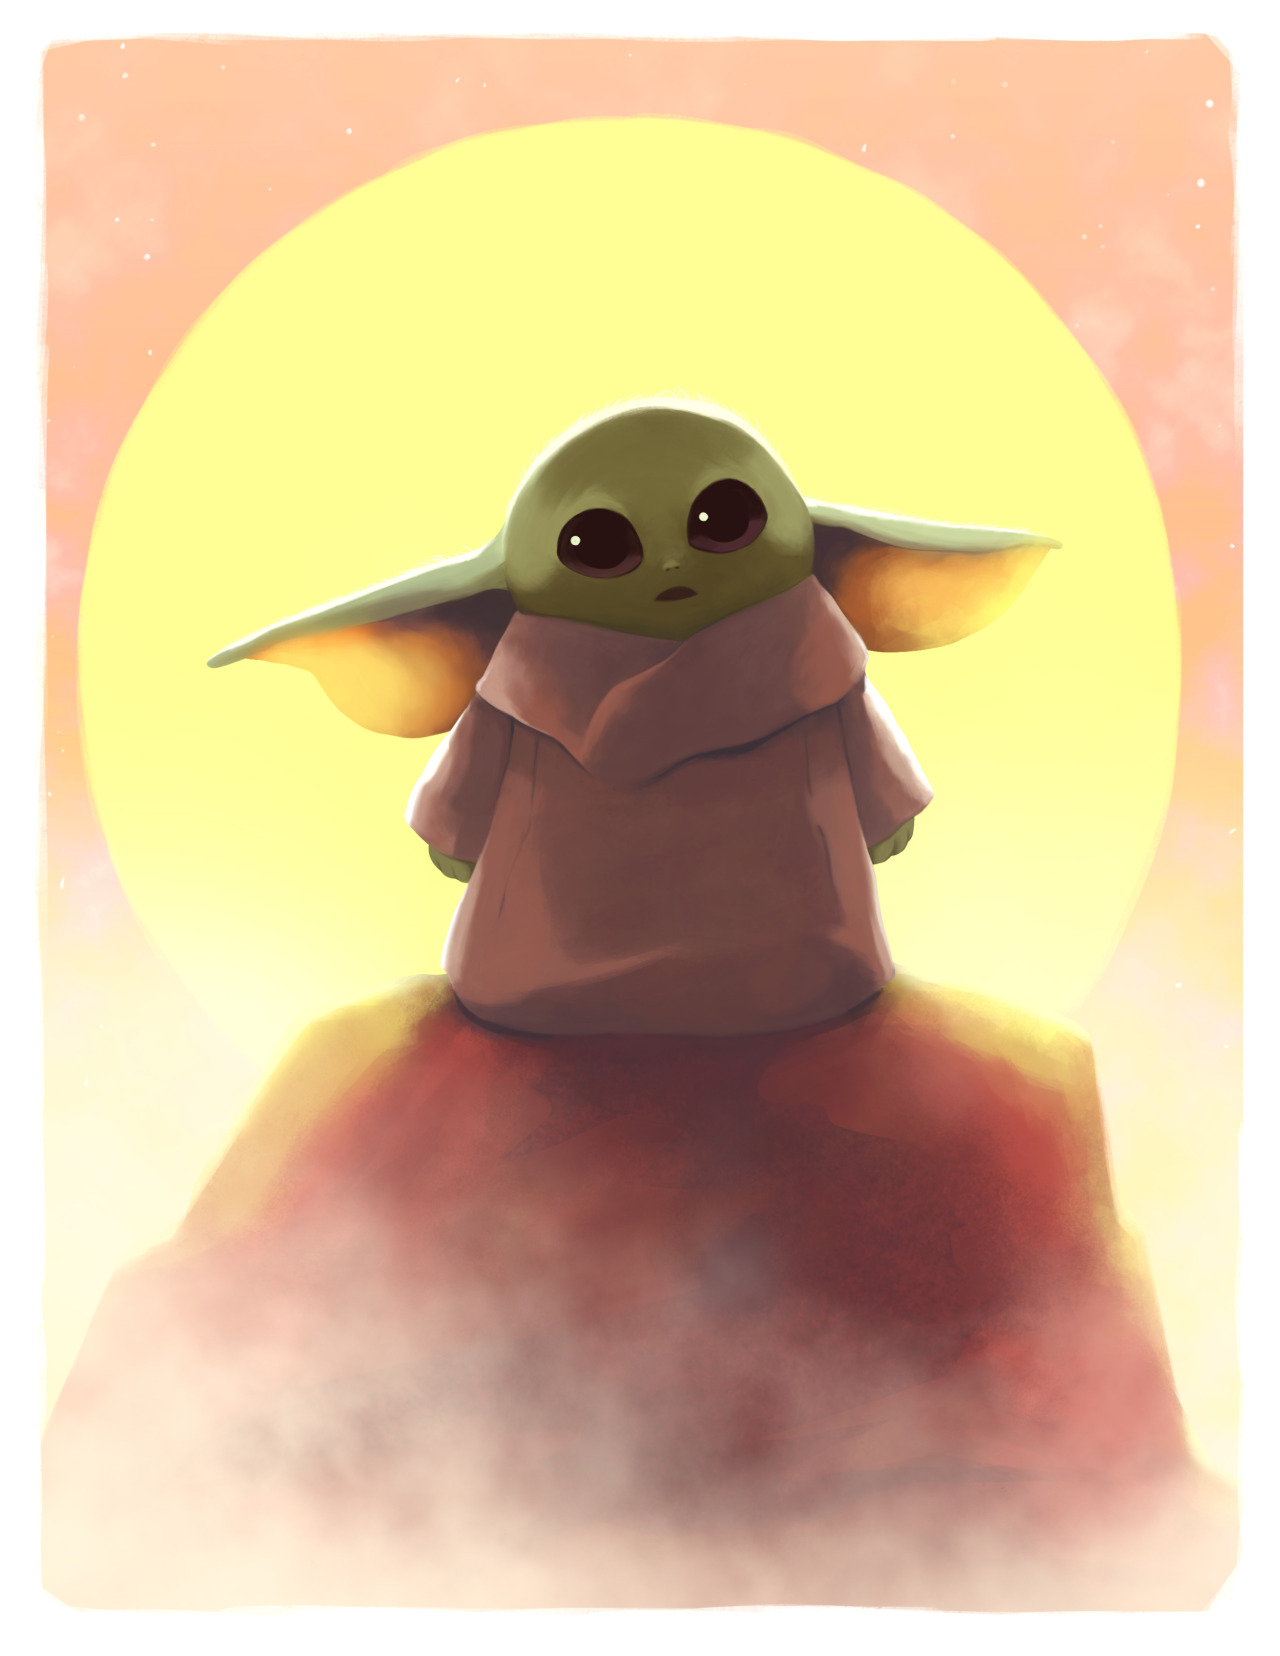 Leann Hill Art - Star Wars The Child / Baby Yoda From The Mandalorian (Large)